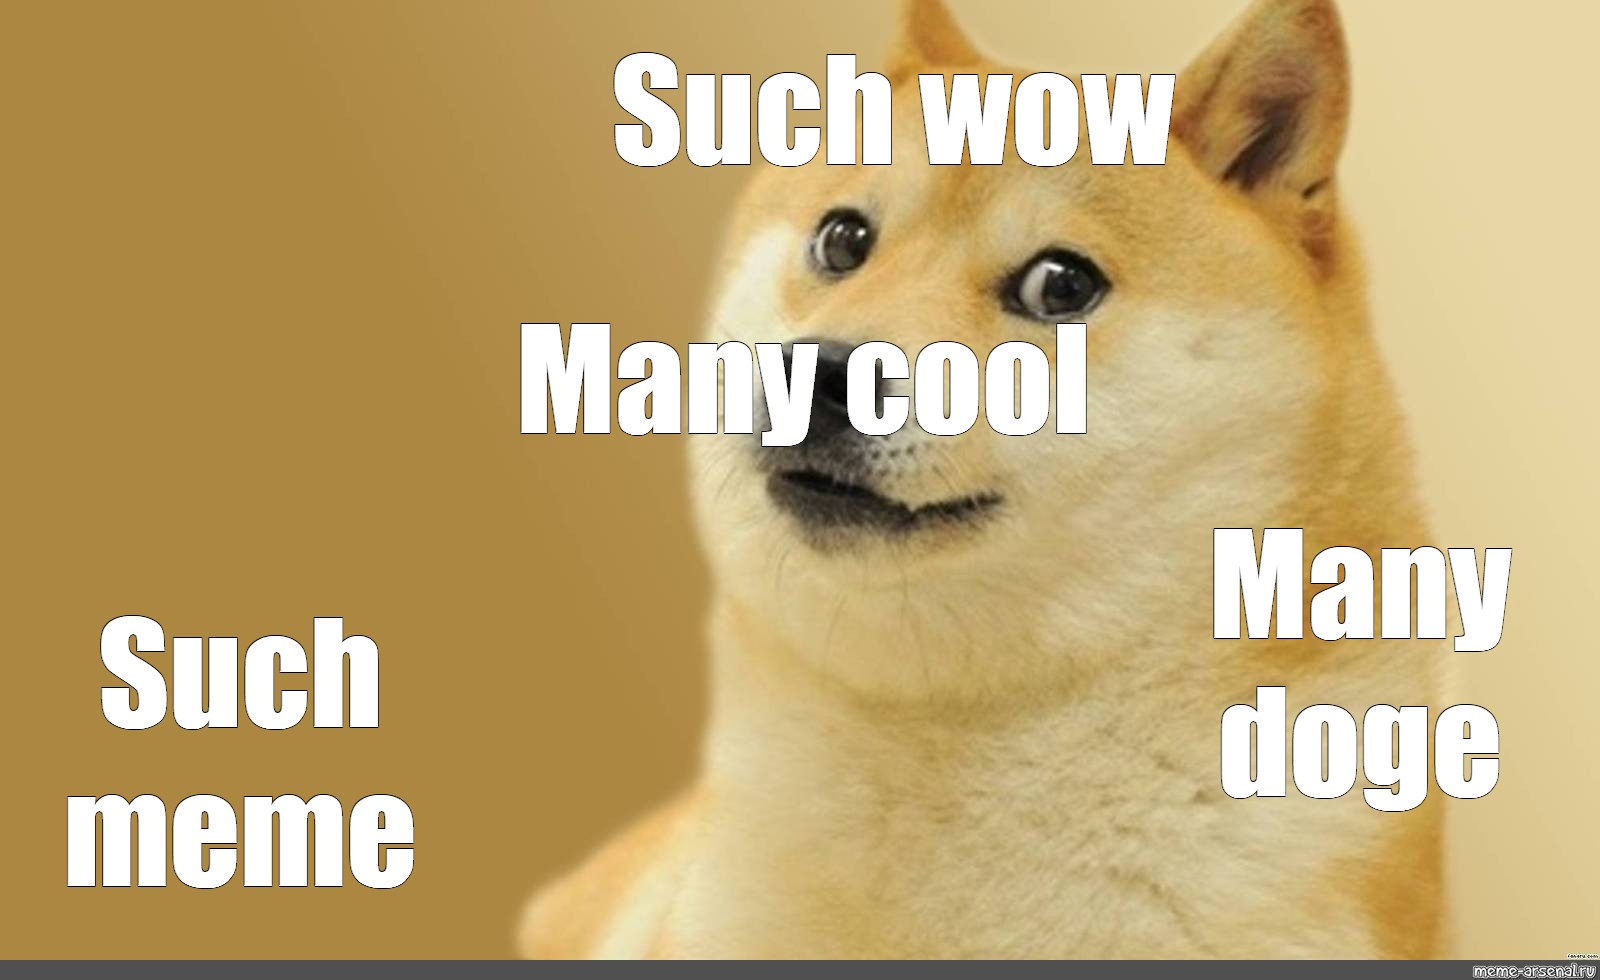 Meme: "Such wow Many cool Many doge Such meme" .